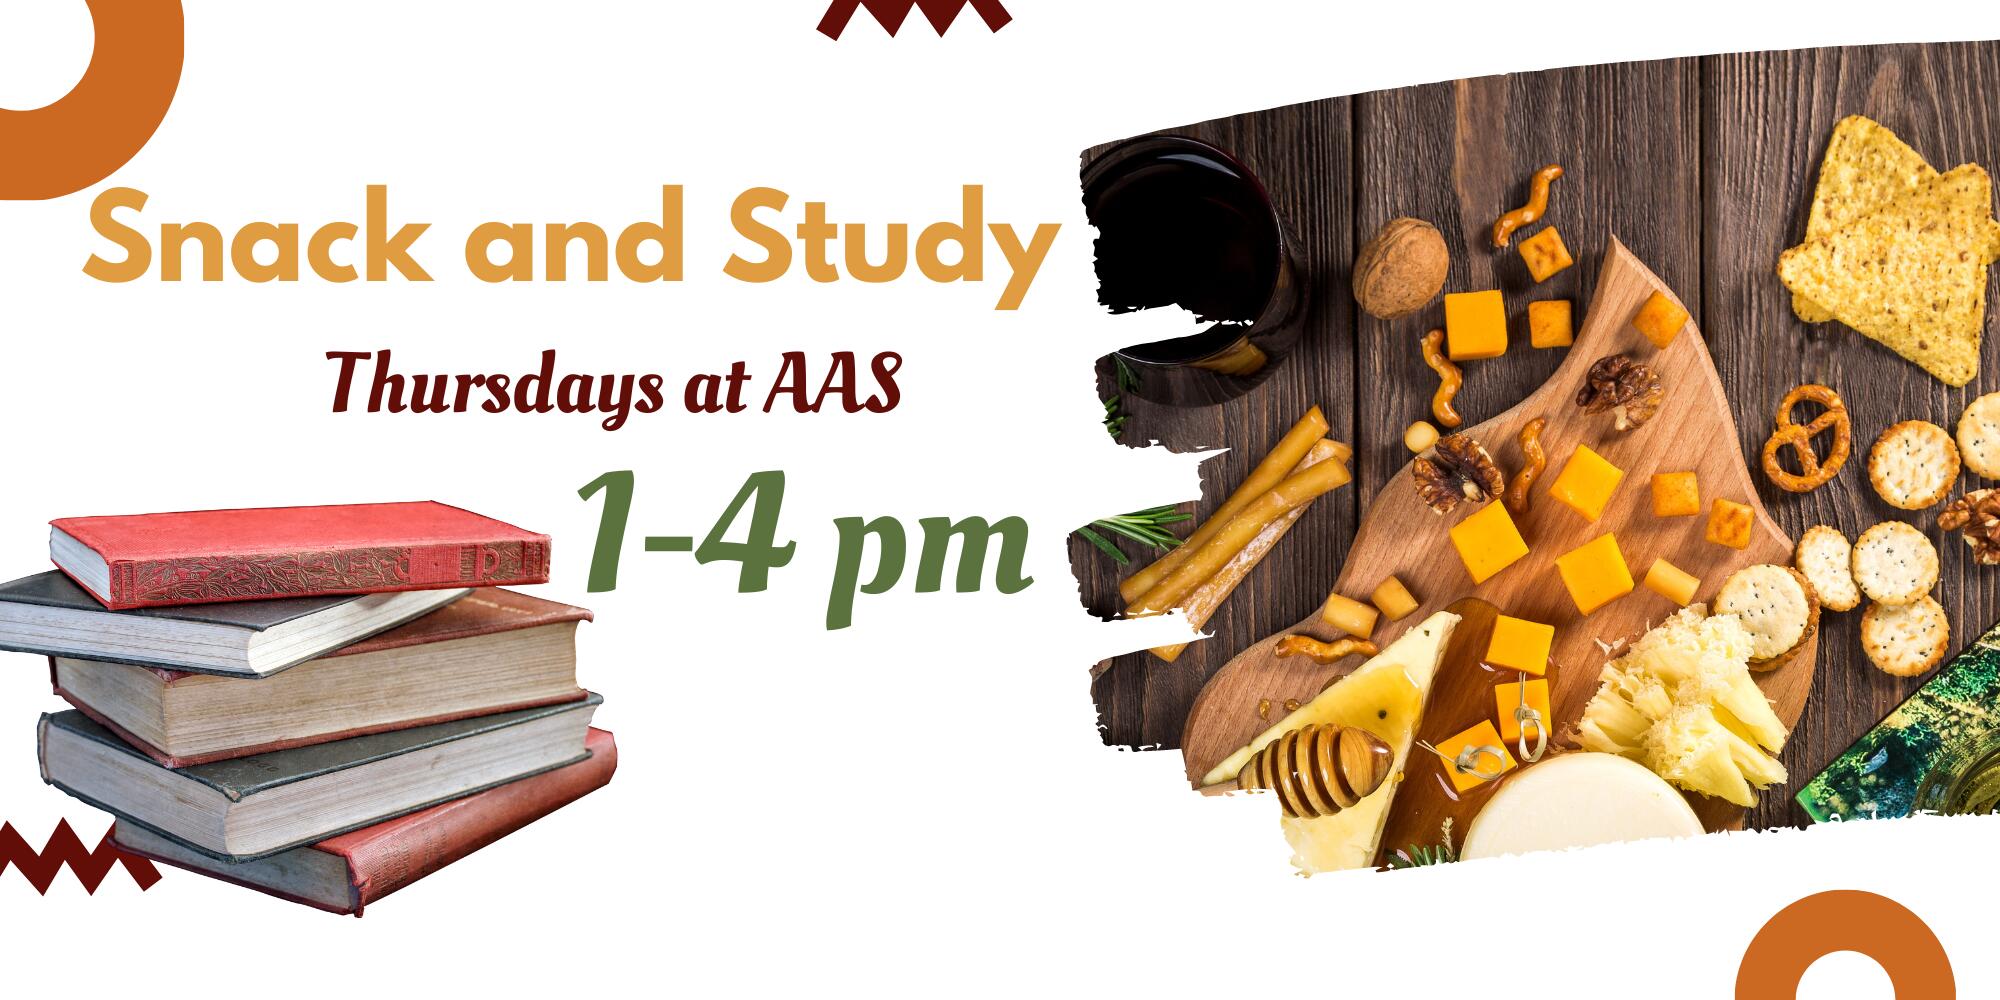 Flyer for event. Text reads "Snack and Study, Thursdays at AAS, 1-4 pm." Images show a spread of snacks and a stack of books.